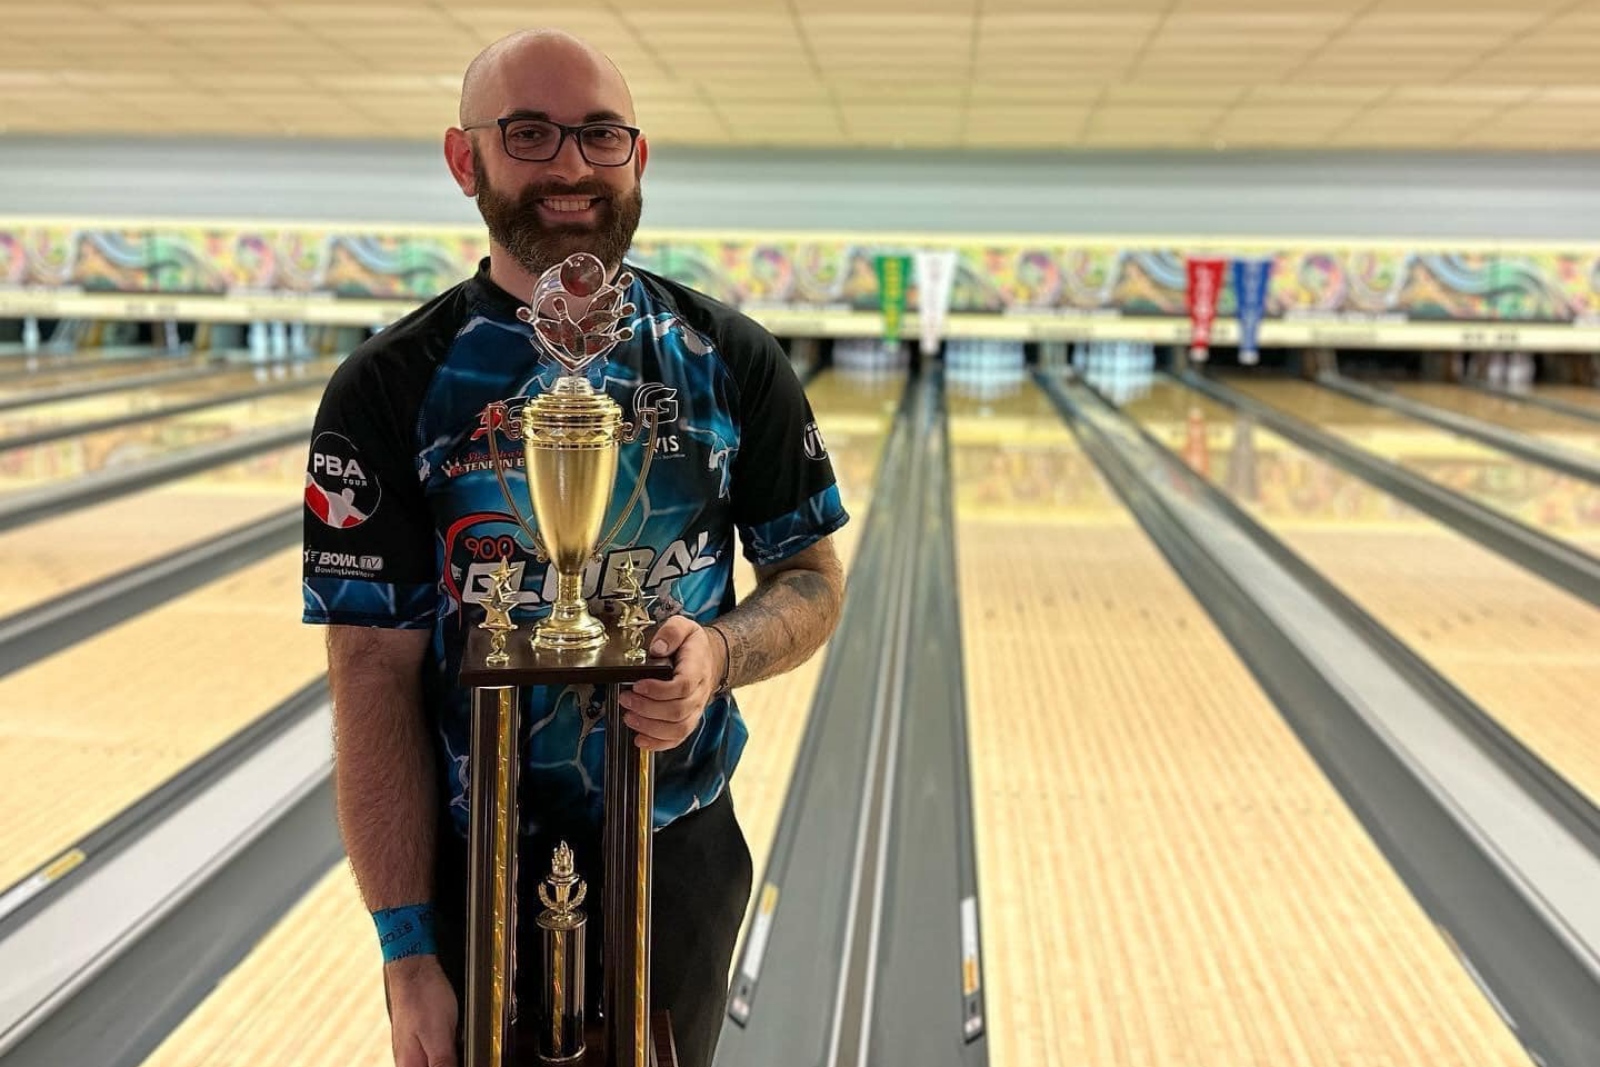 Sam Cooley holds a trophy while standing next to bowling lanes